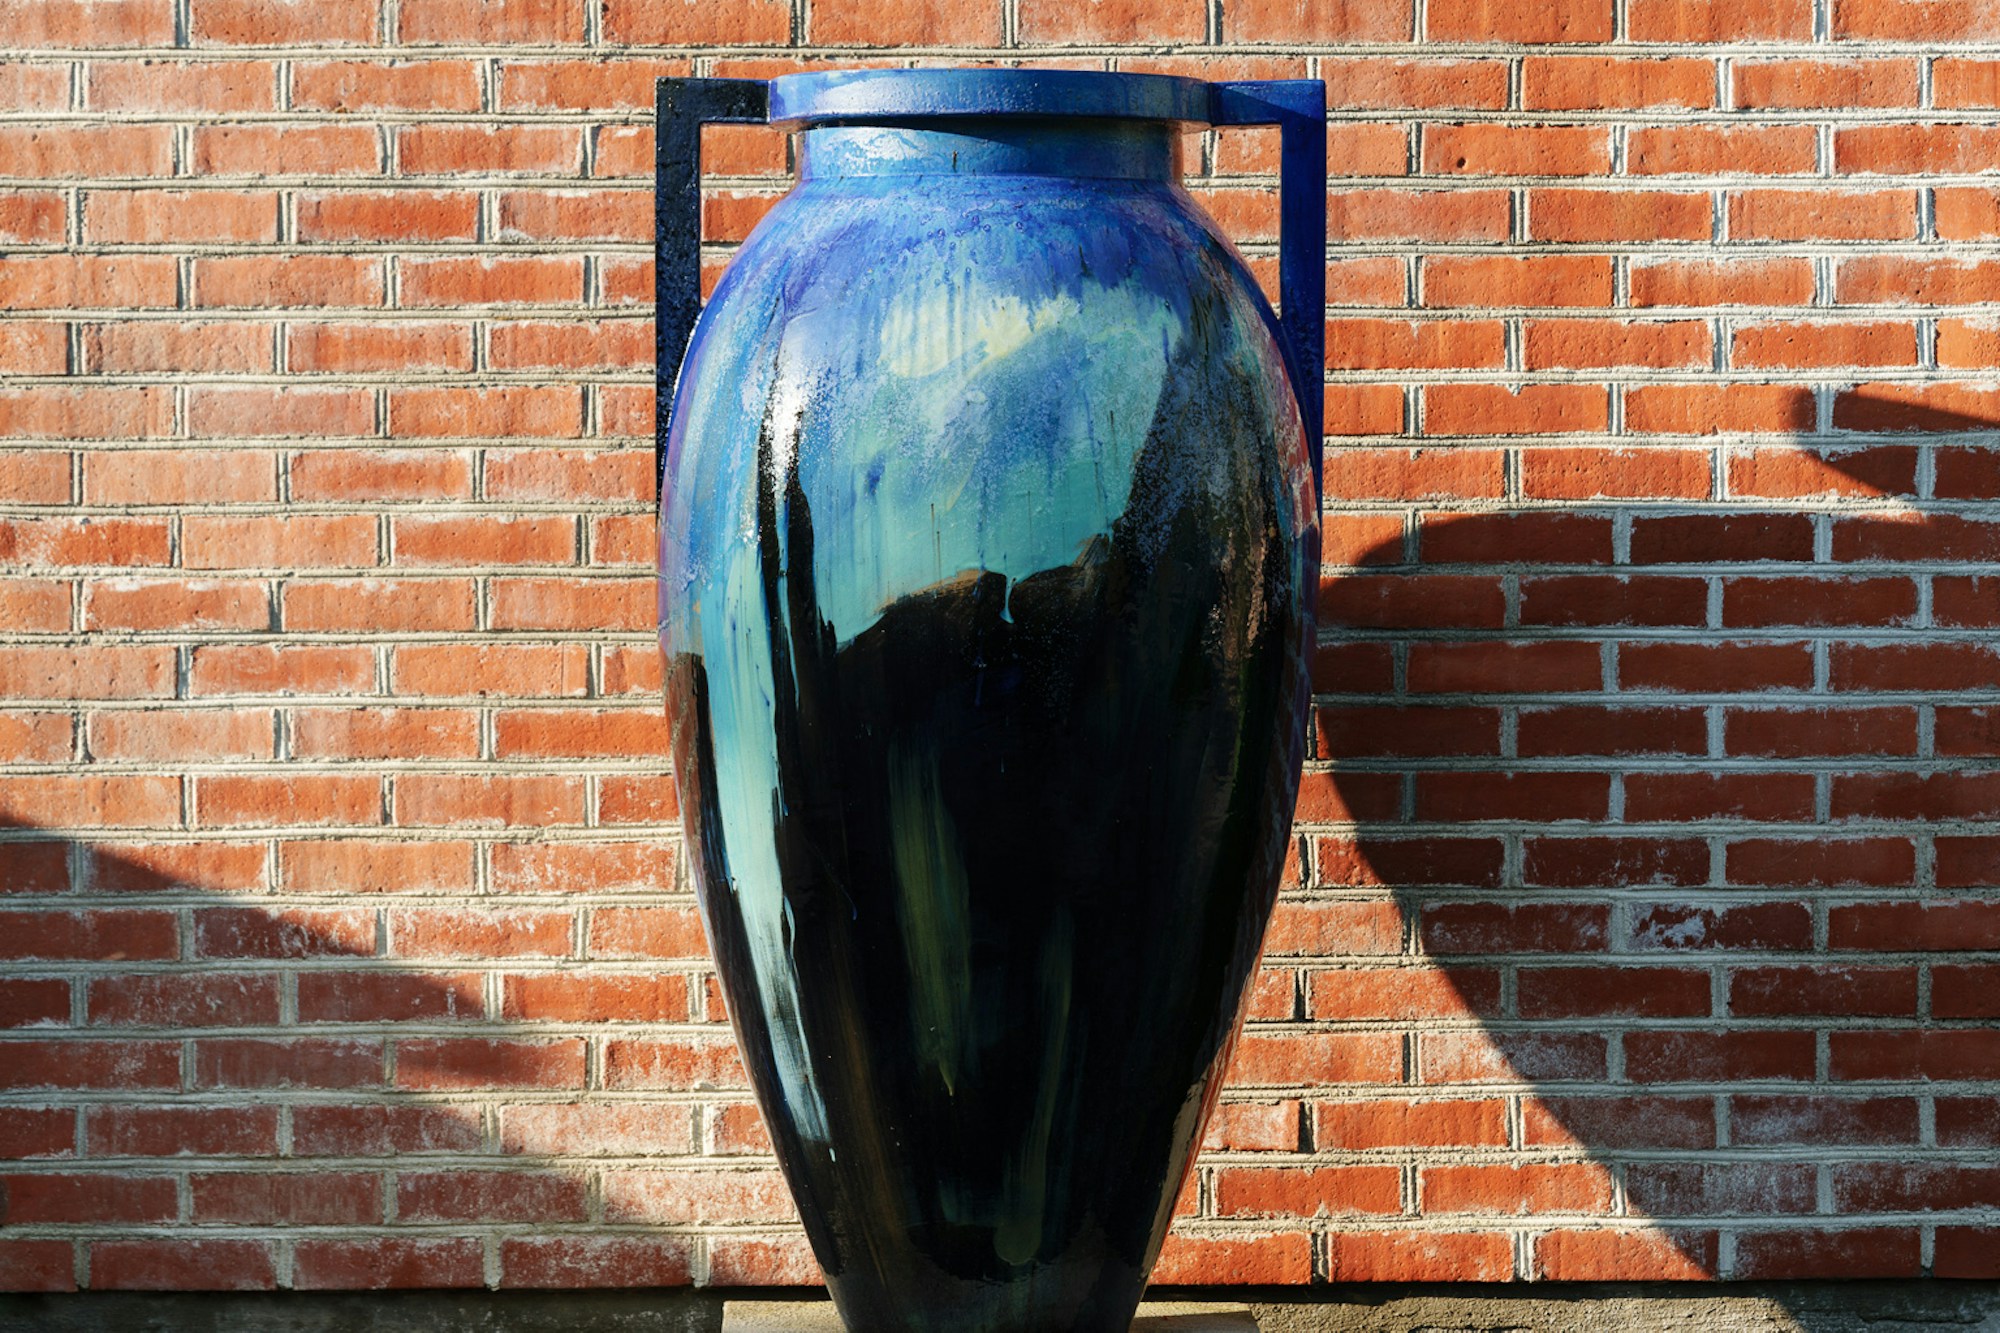 Large-scale jar, painted